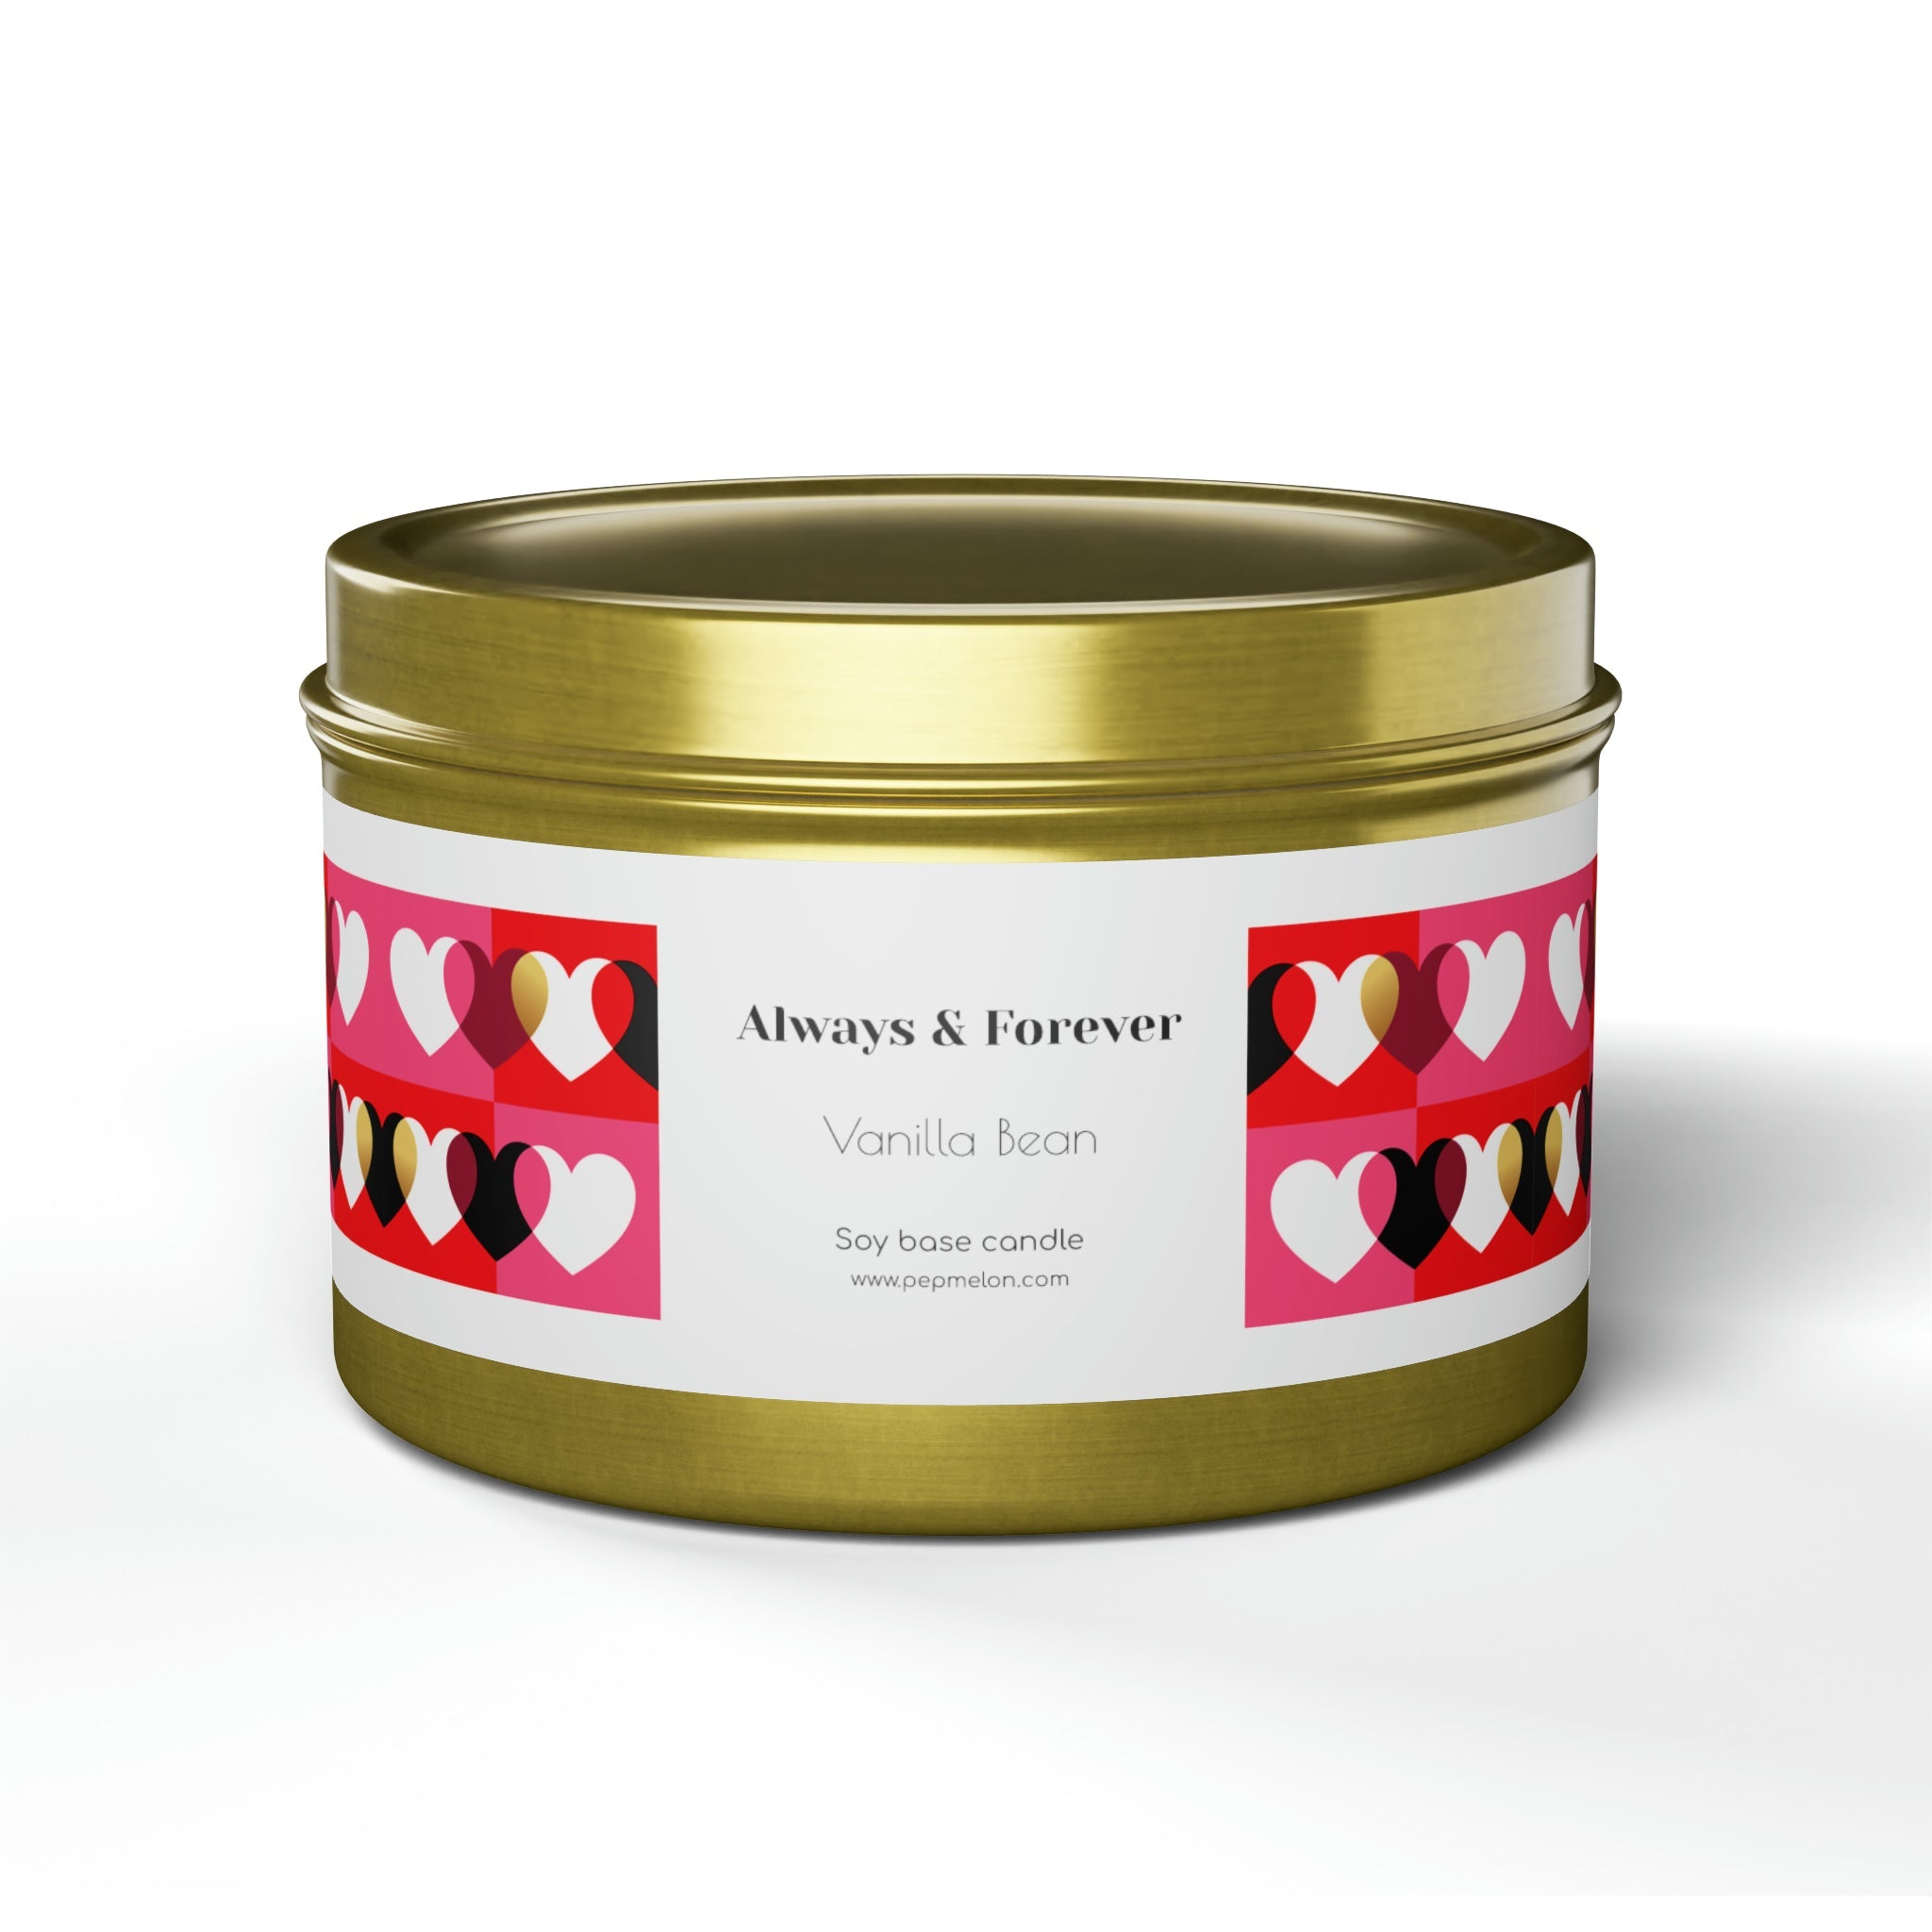 Vanilla Bean Always & Forever Soy base candle love, valentine's day gift Tin Candles-9